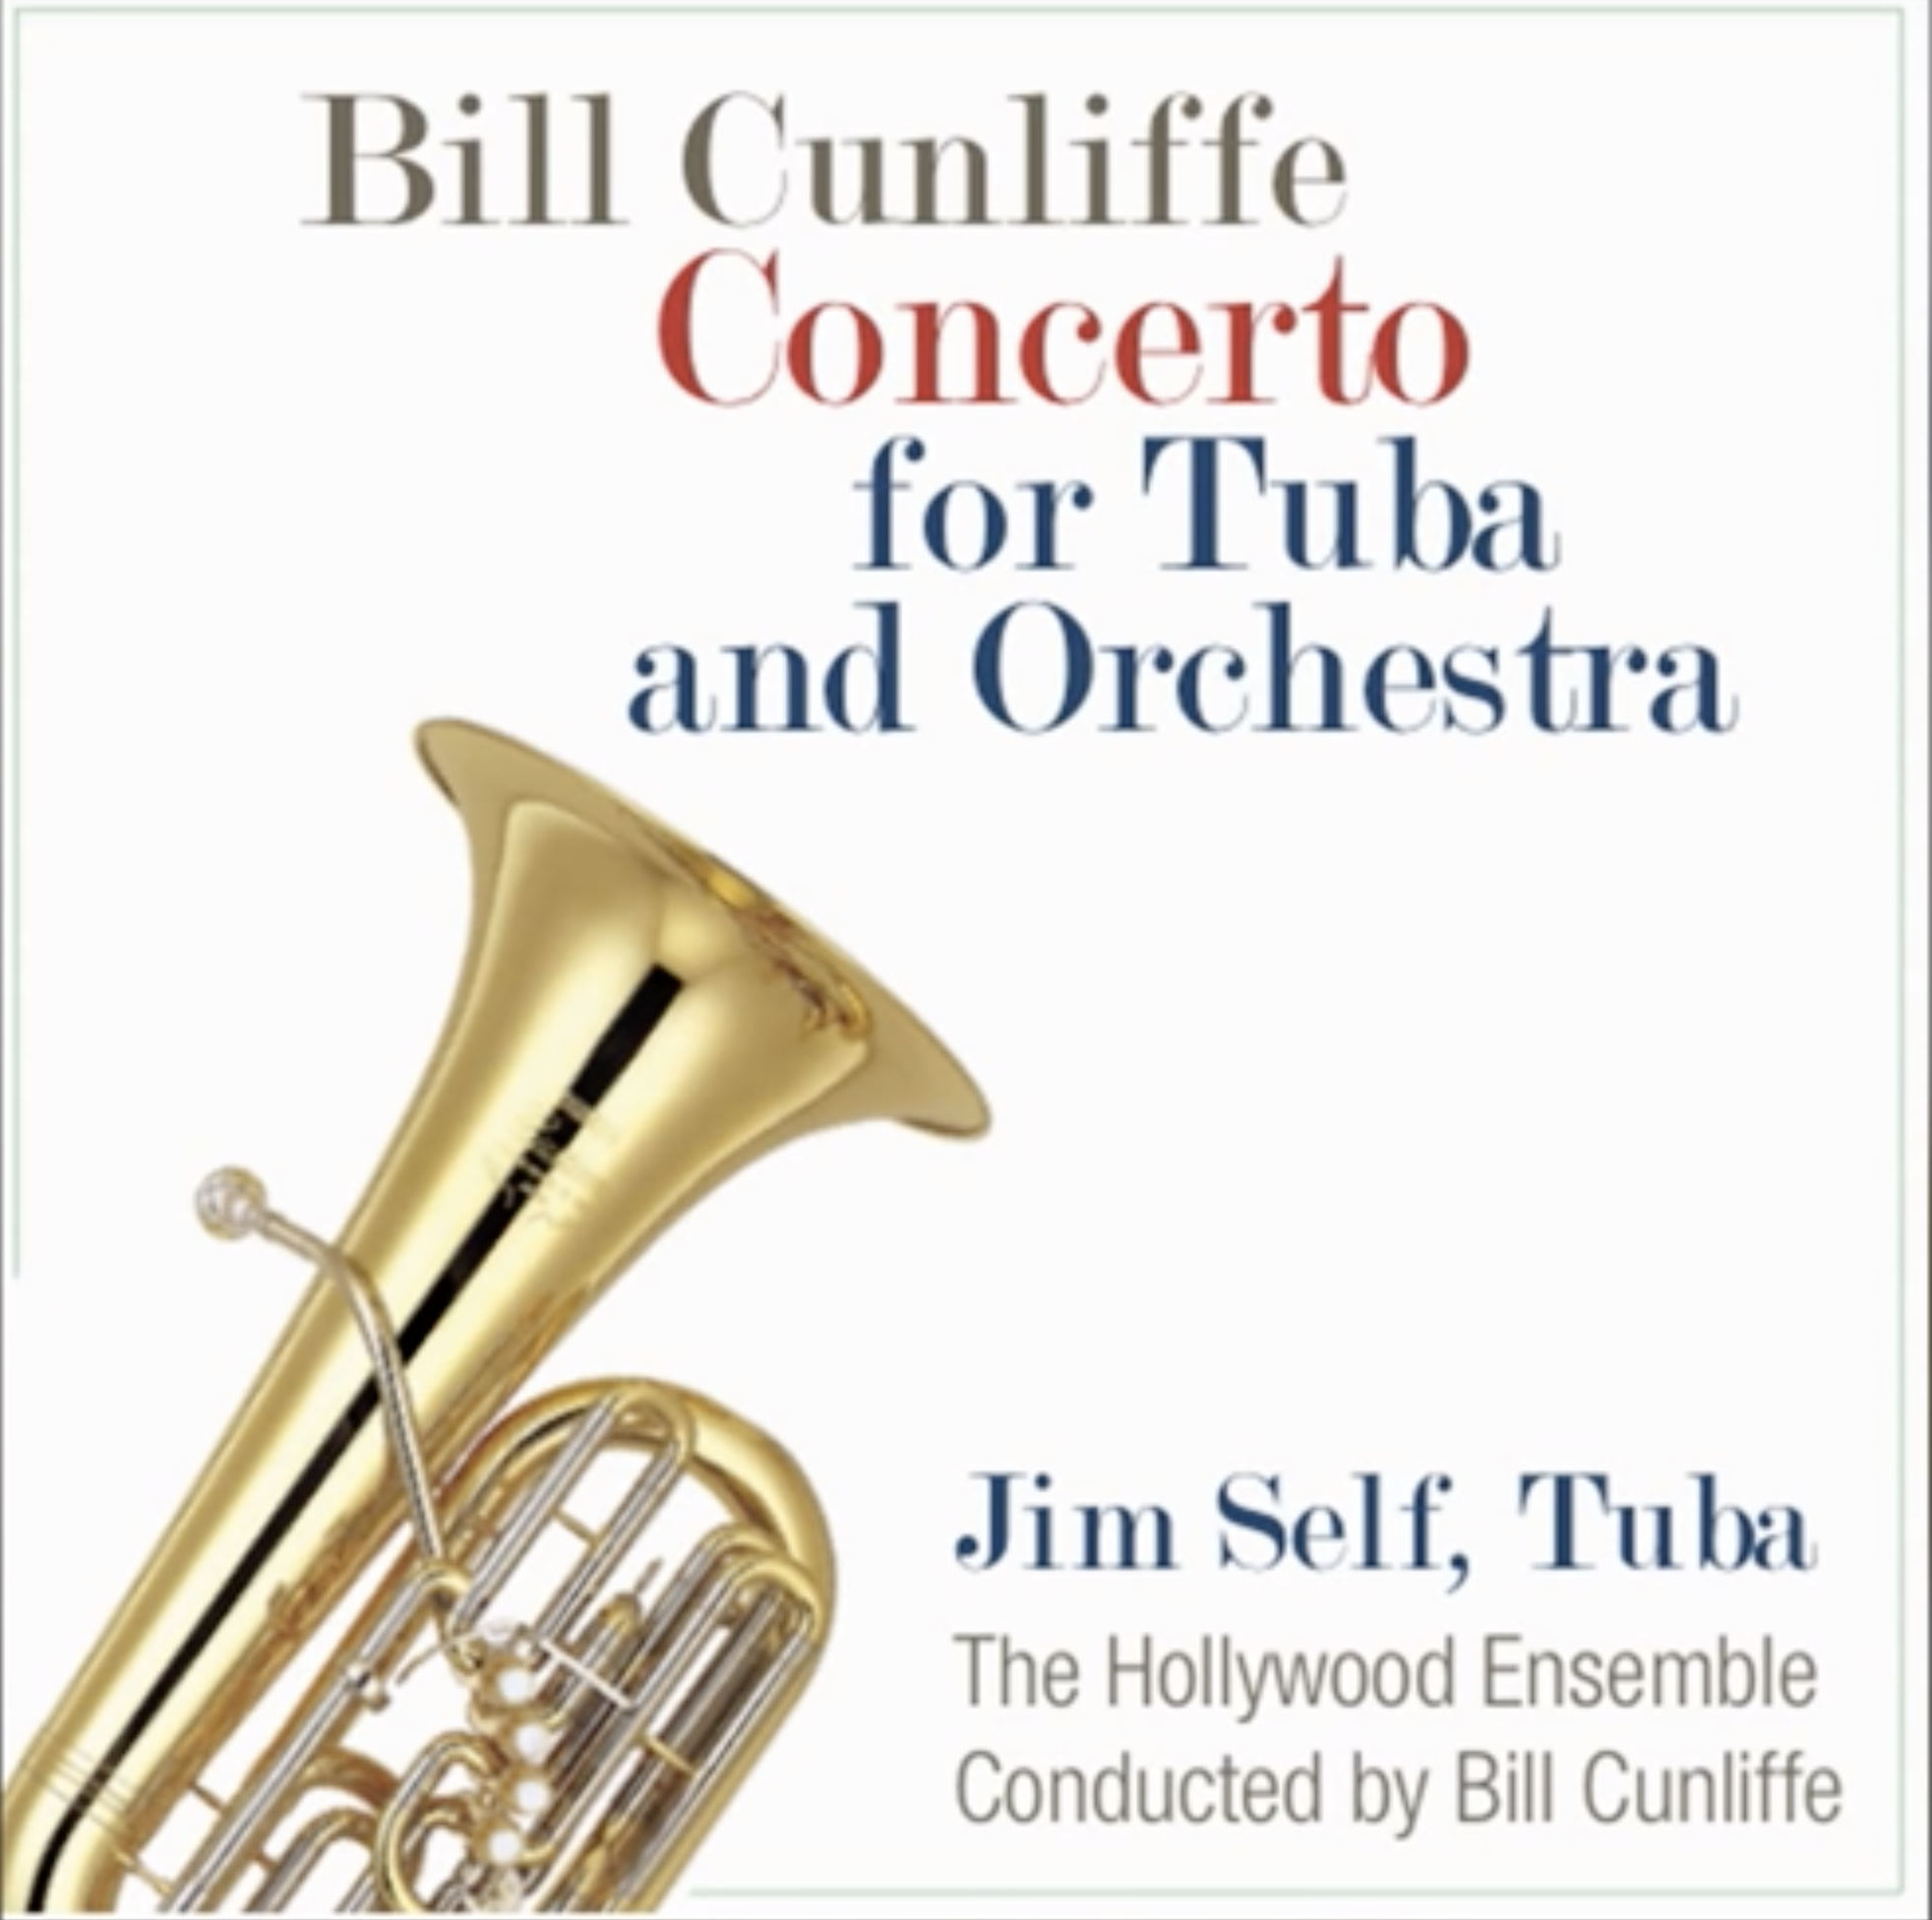 Bill Cunliffe Concerto for Tuba and Orchestra